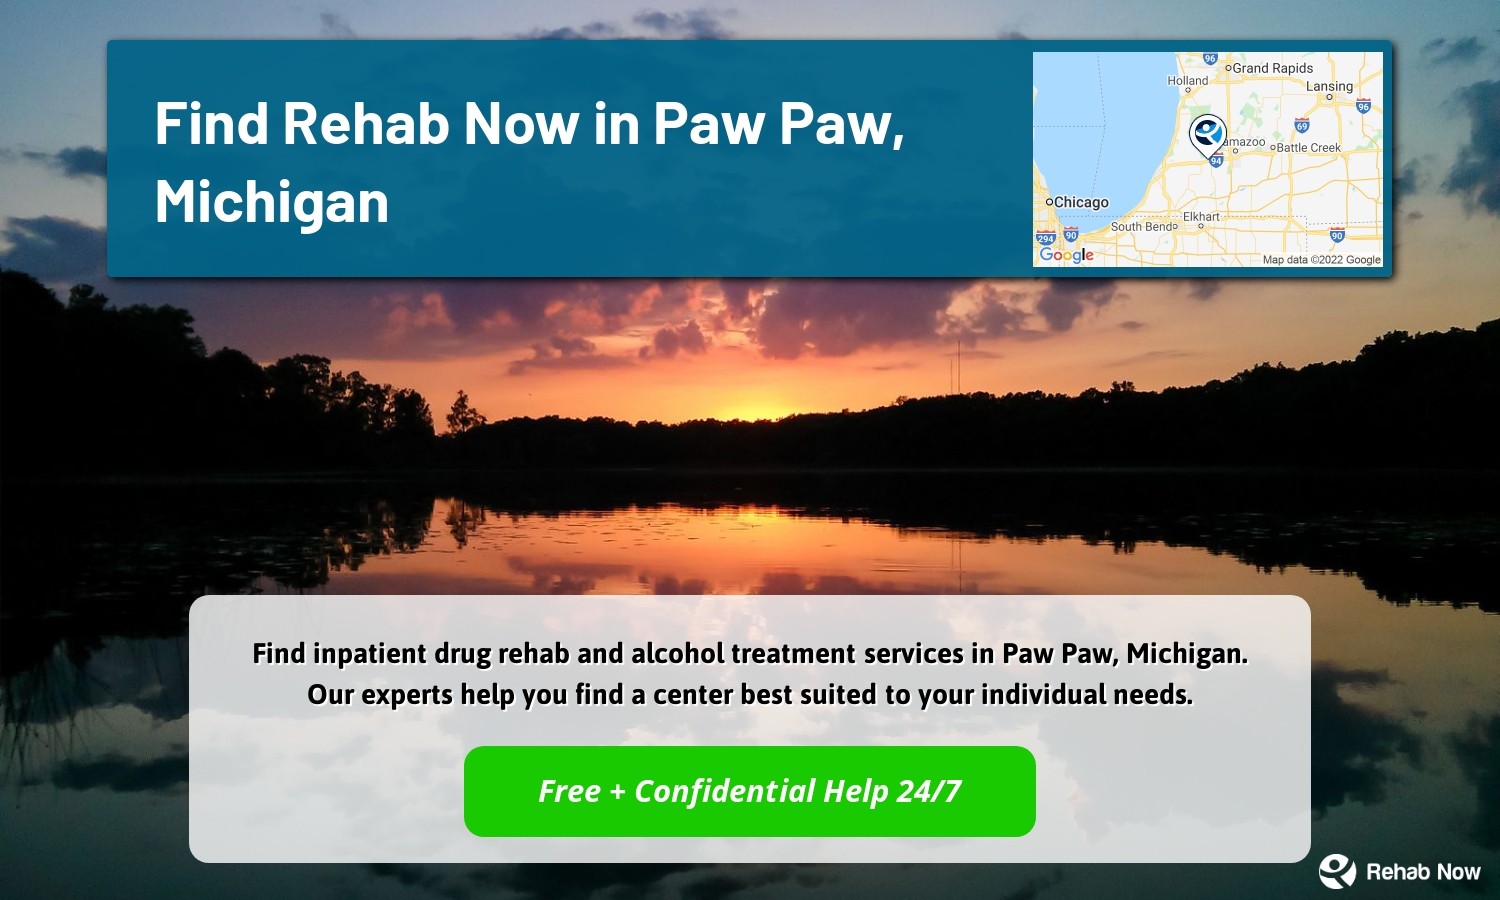 Find inpatient drug rehab and alcohol treatment services in Paw Paw, Michigan. Our experts help you find a center best suited to your individual needs.